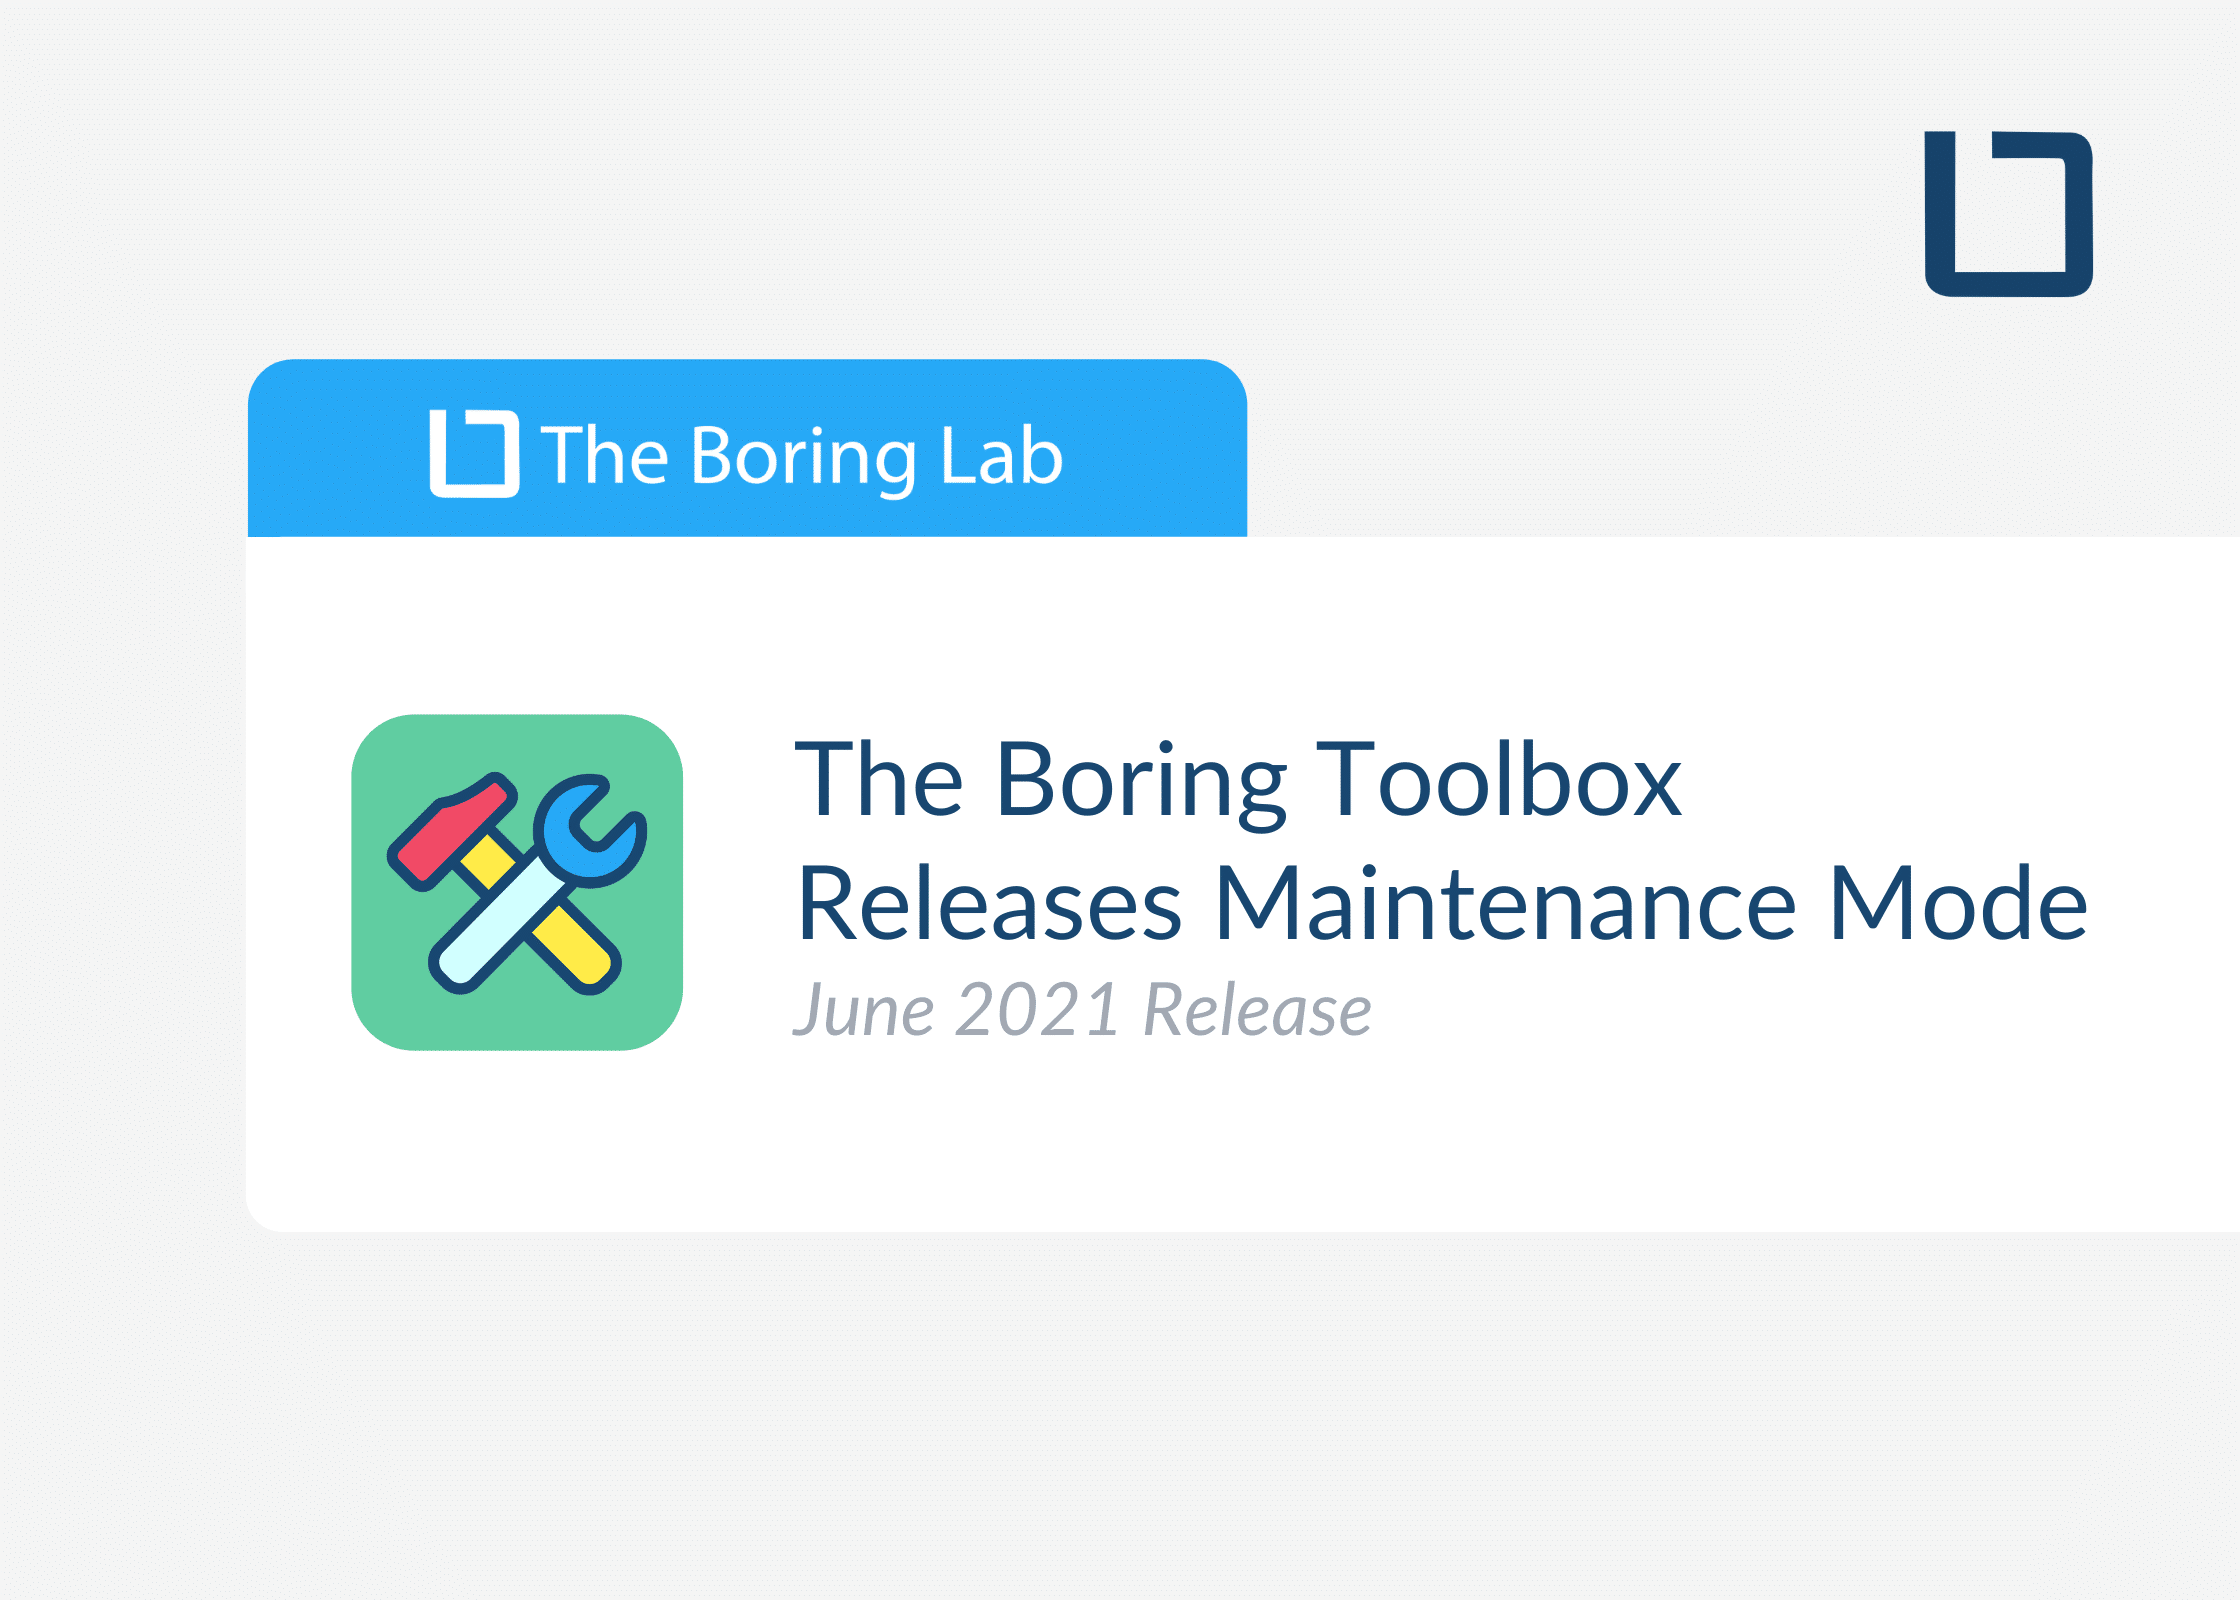 The Boring Toolbox Releases Maintenance Mode for Milestone XProtect